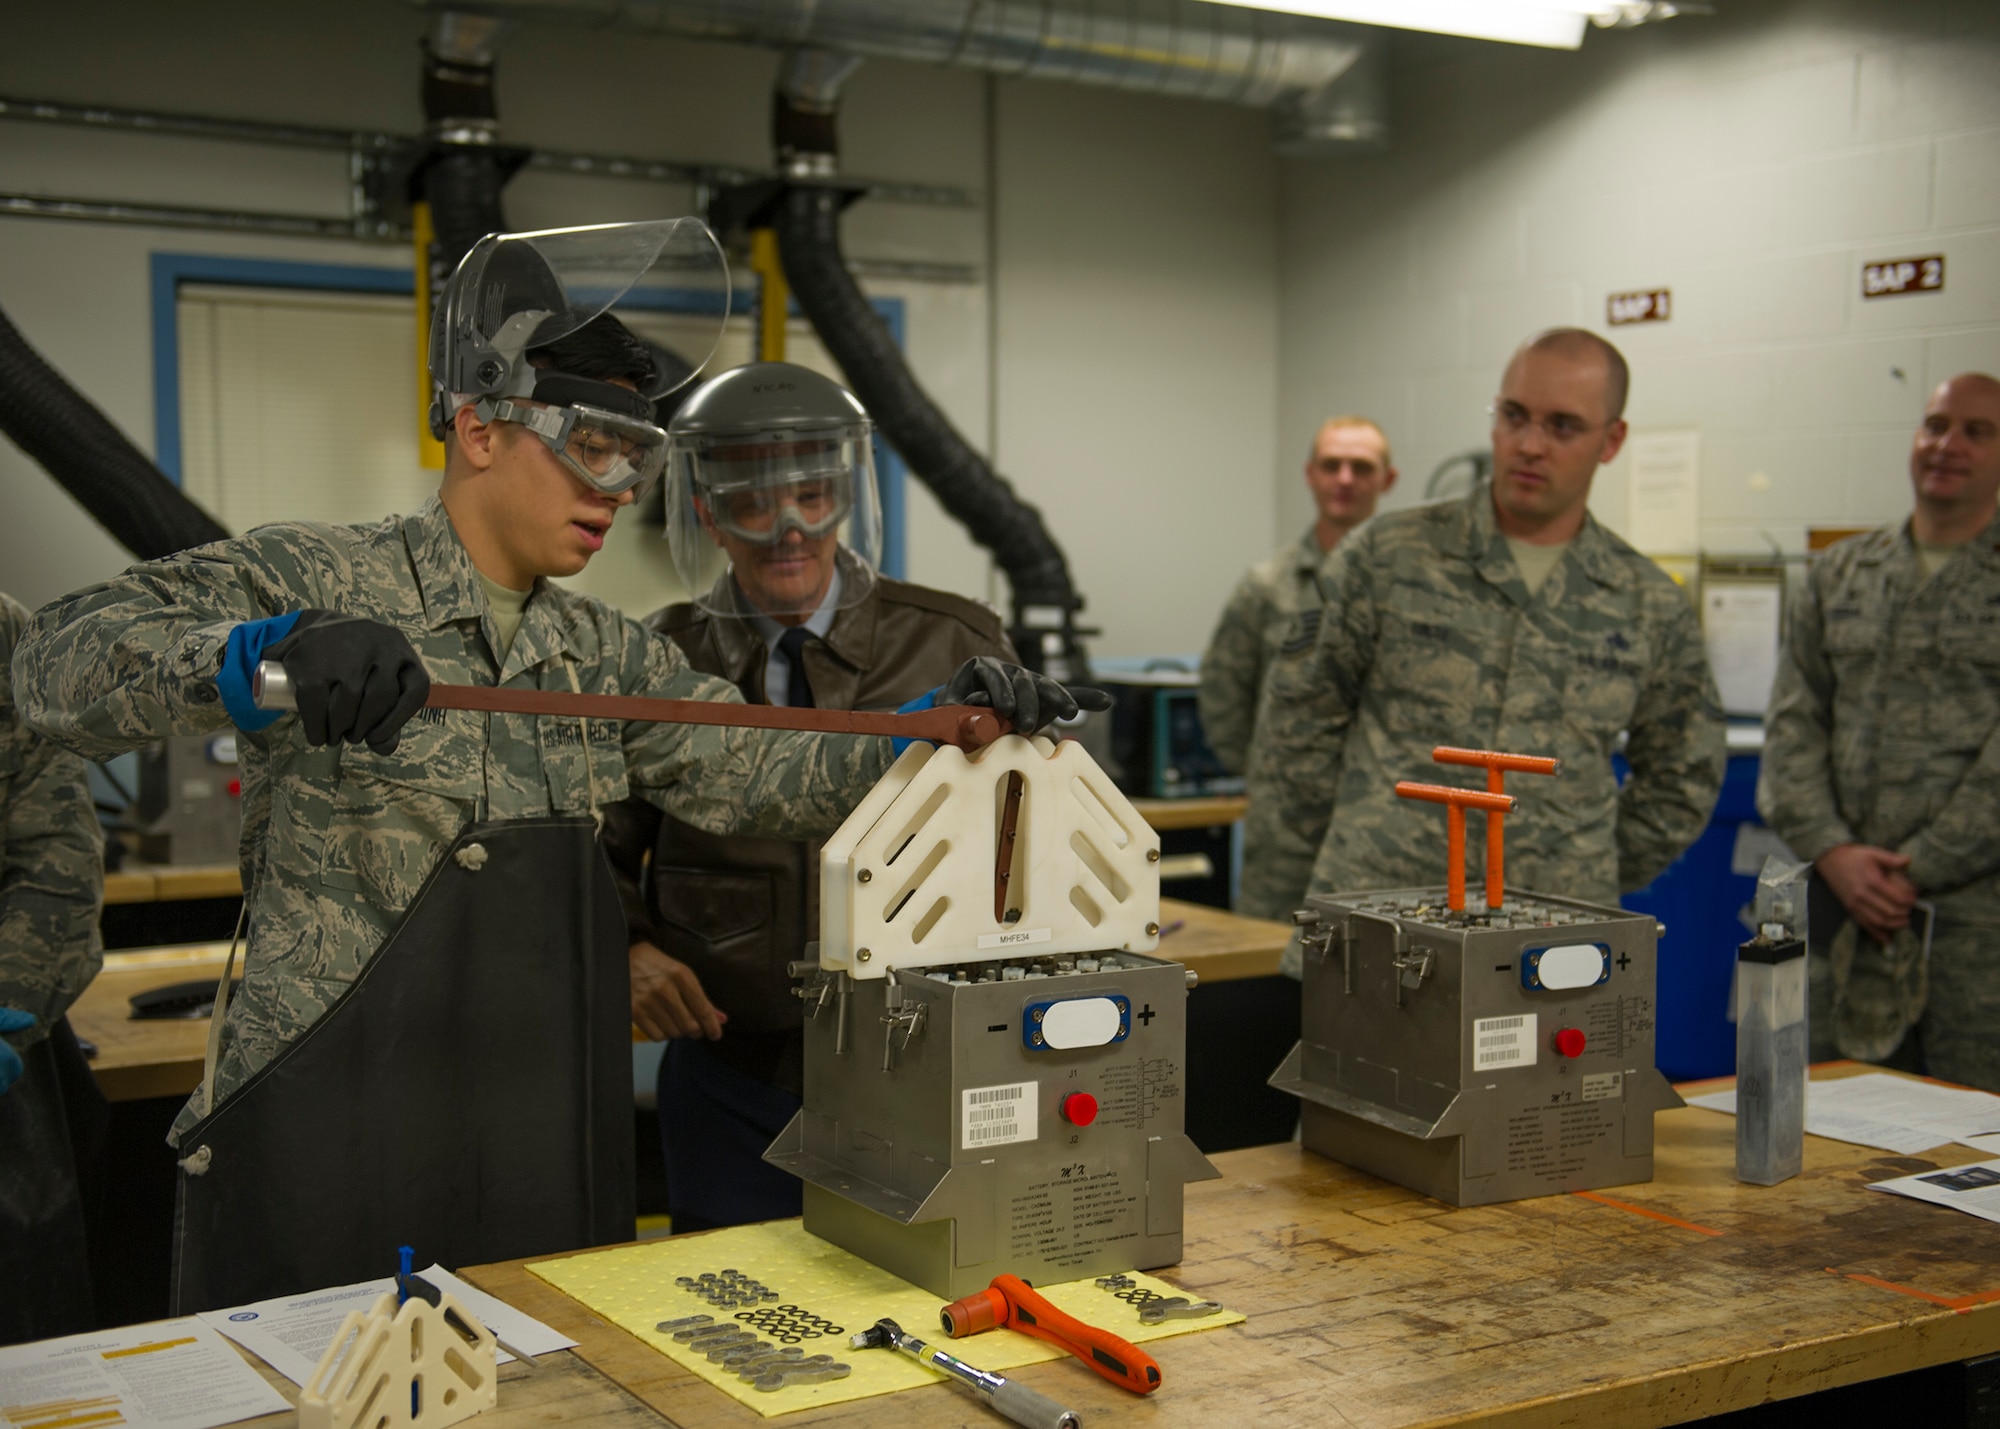 U.S. Air Force Senior Airman Brandon Dinh, 446th Maintenance Squadron (MXS) electrical and environmental technician, demonstrates how to operate a battery cell extracting device to Maj. Gen. Randall Ogden, commander of the 4th Air Force, U.S. Air Force Reserve Command, on McChord Field, Washington, Oct. 6, 2019. The innovative battery cell extractor, designed by members of the 446th MXS, was assembled and tested to provide a safer and more effective workflow when extracting battery cells. (U.S. Air Force photo by Senior Airman Christopher Sommers)